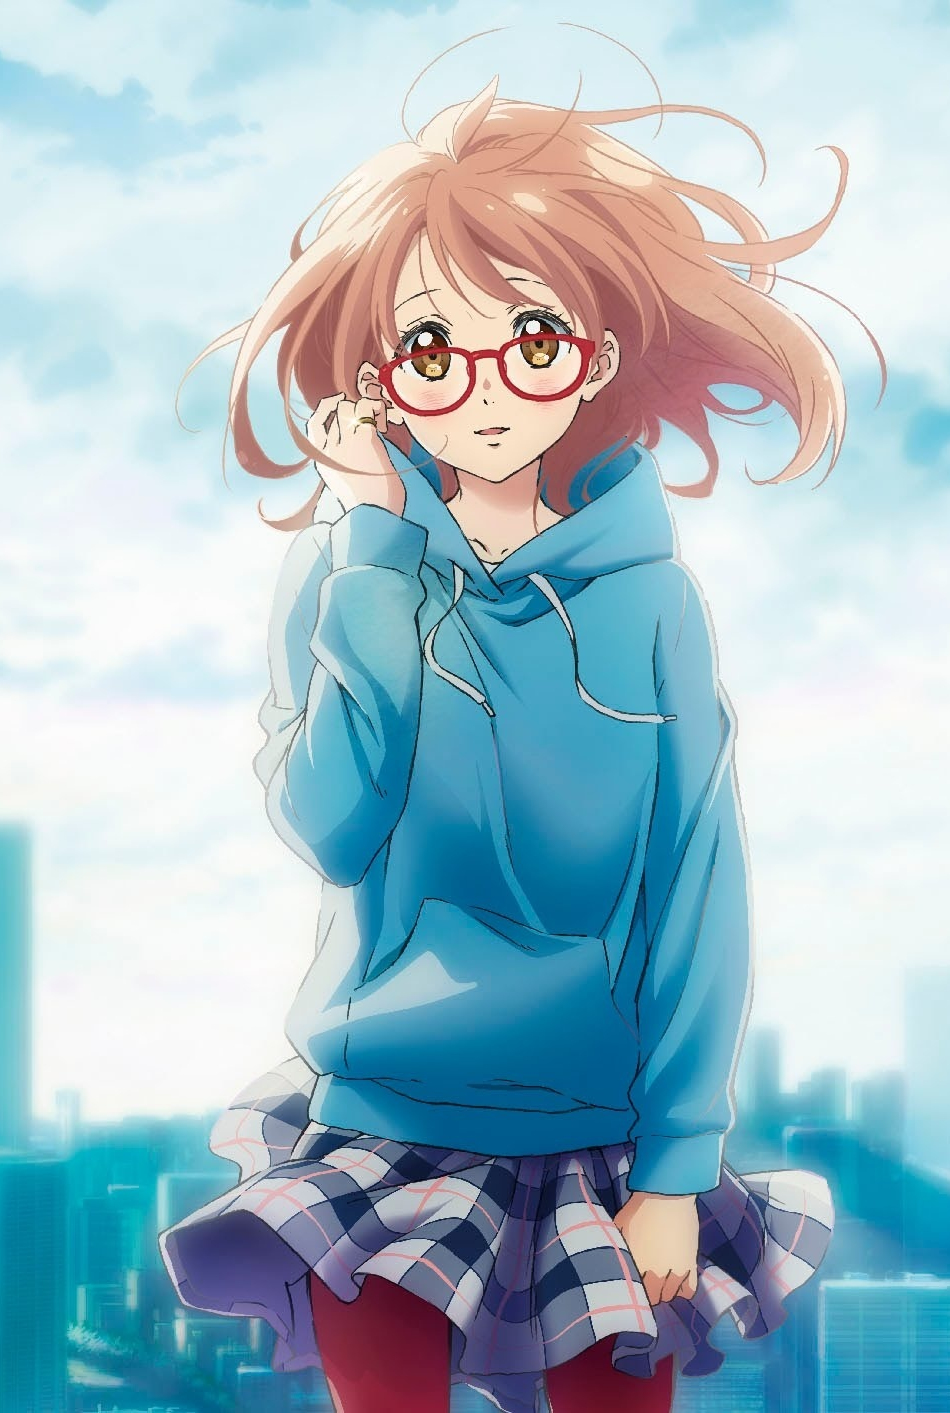 with Cute glasses girl anime